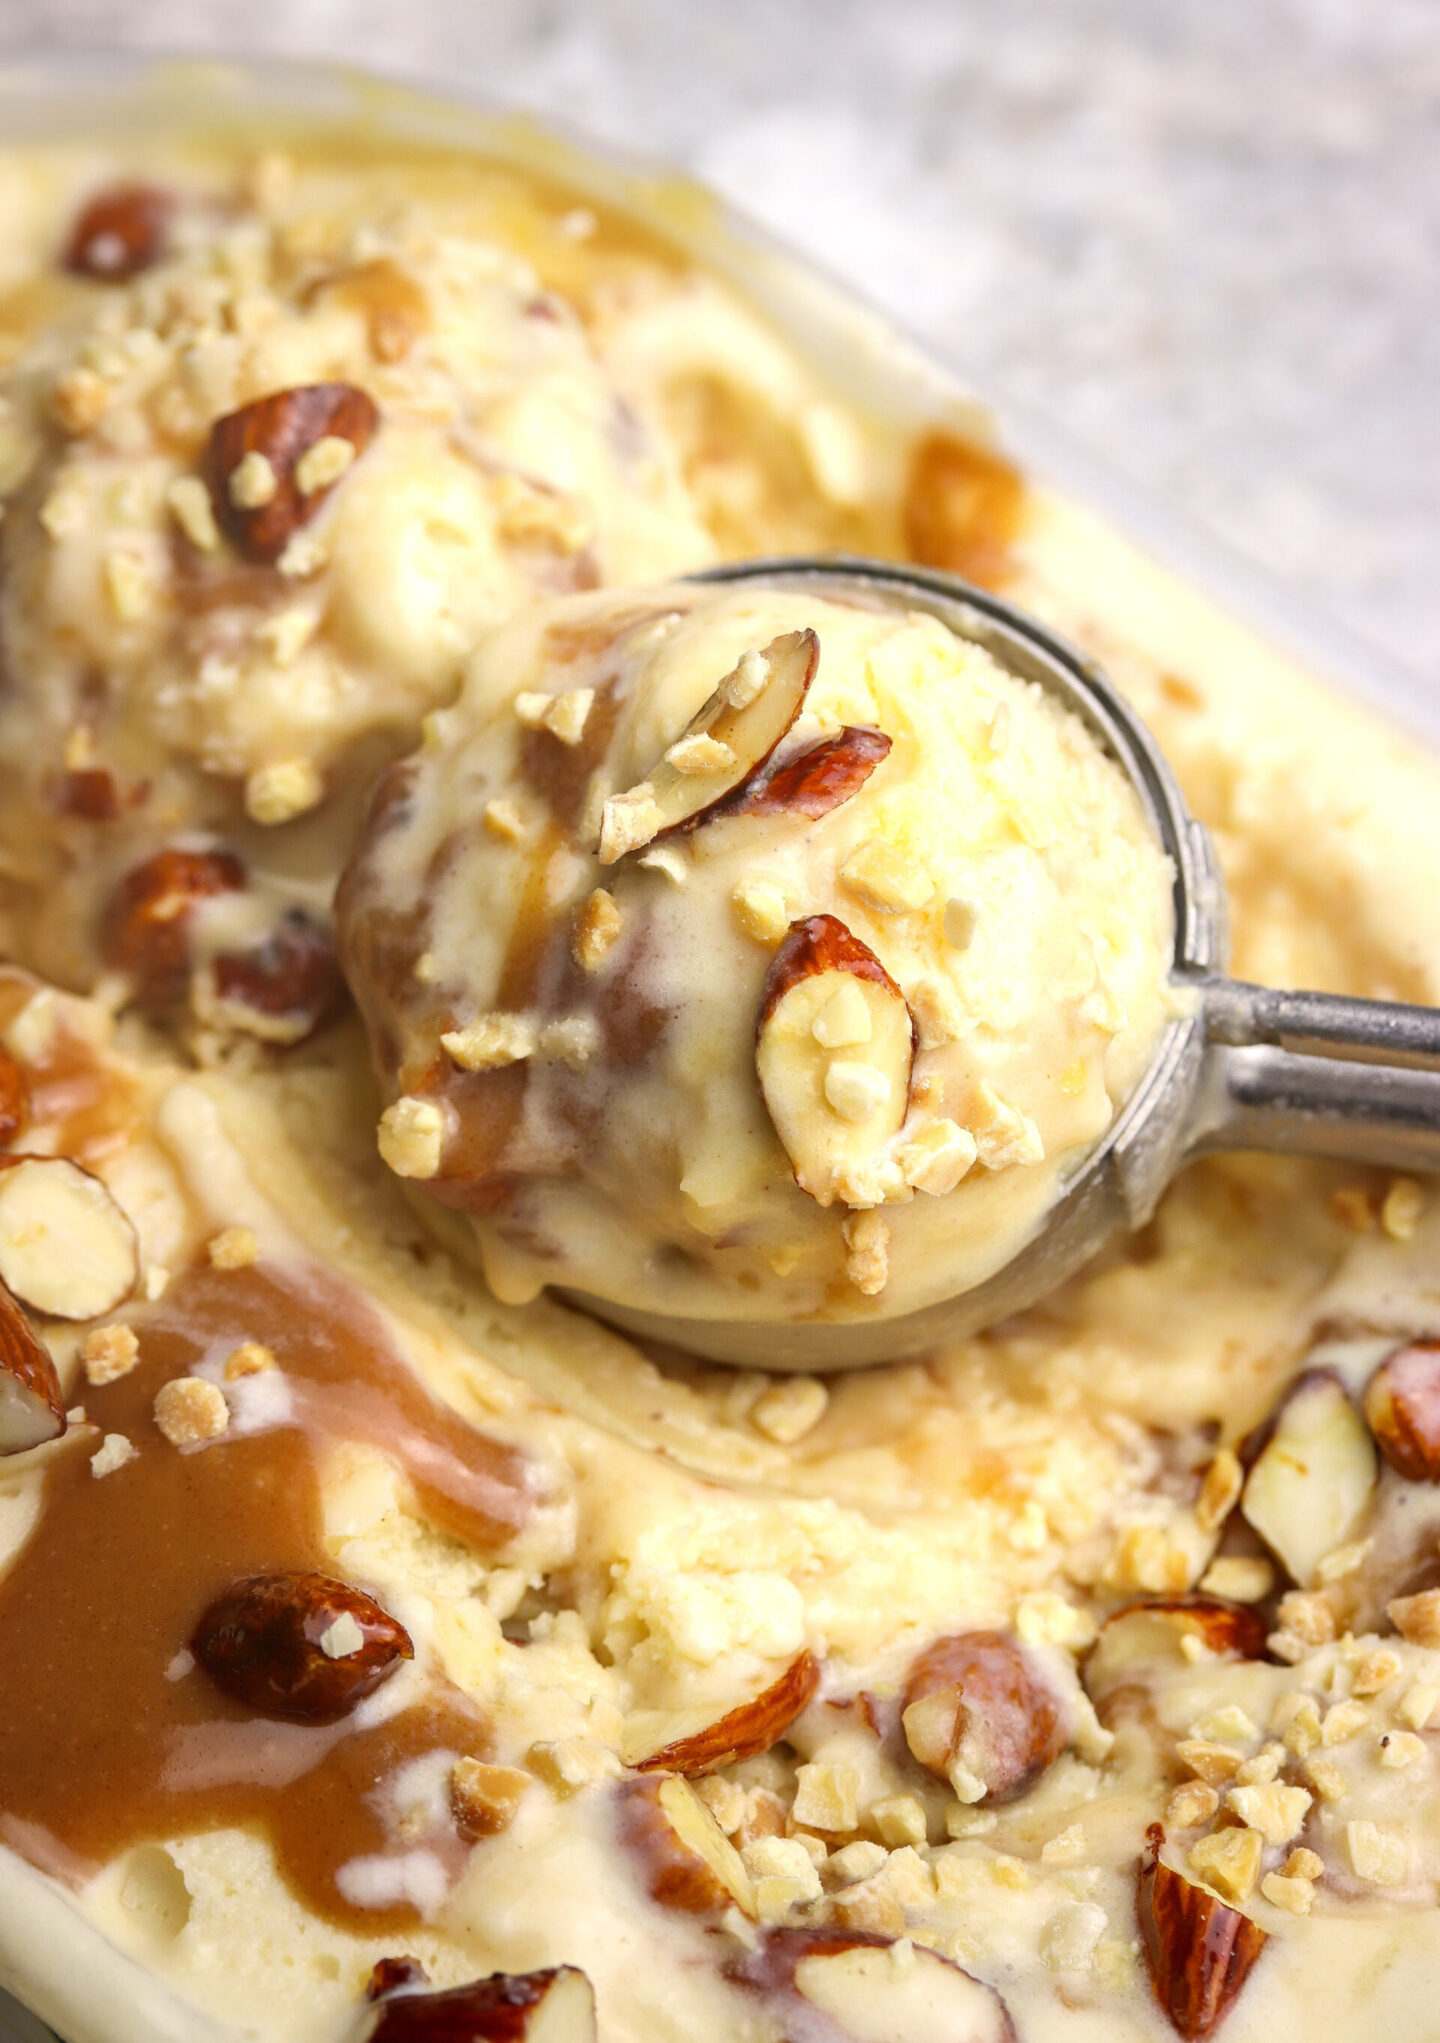 Brown Butter Ice Cream with Salted Caramel & Candied Almonds